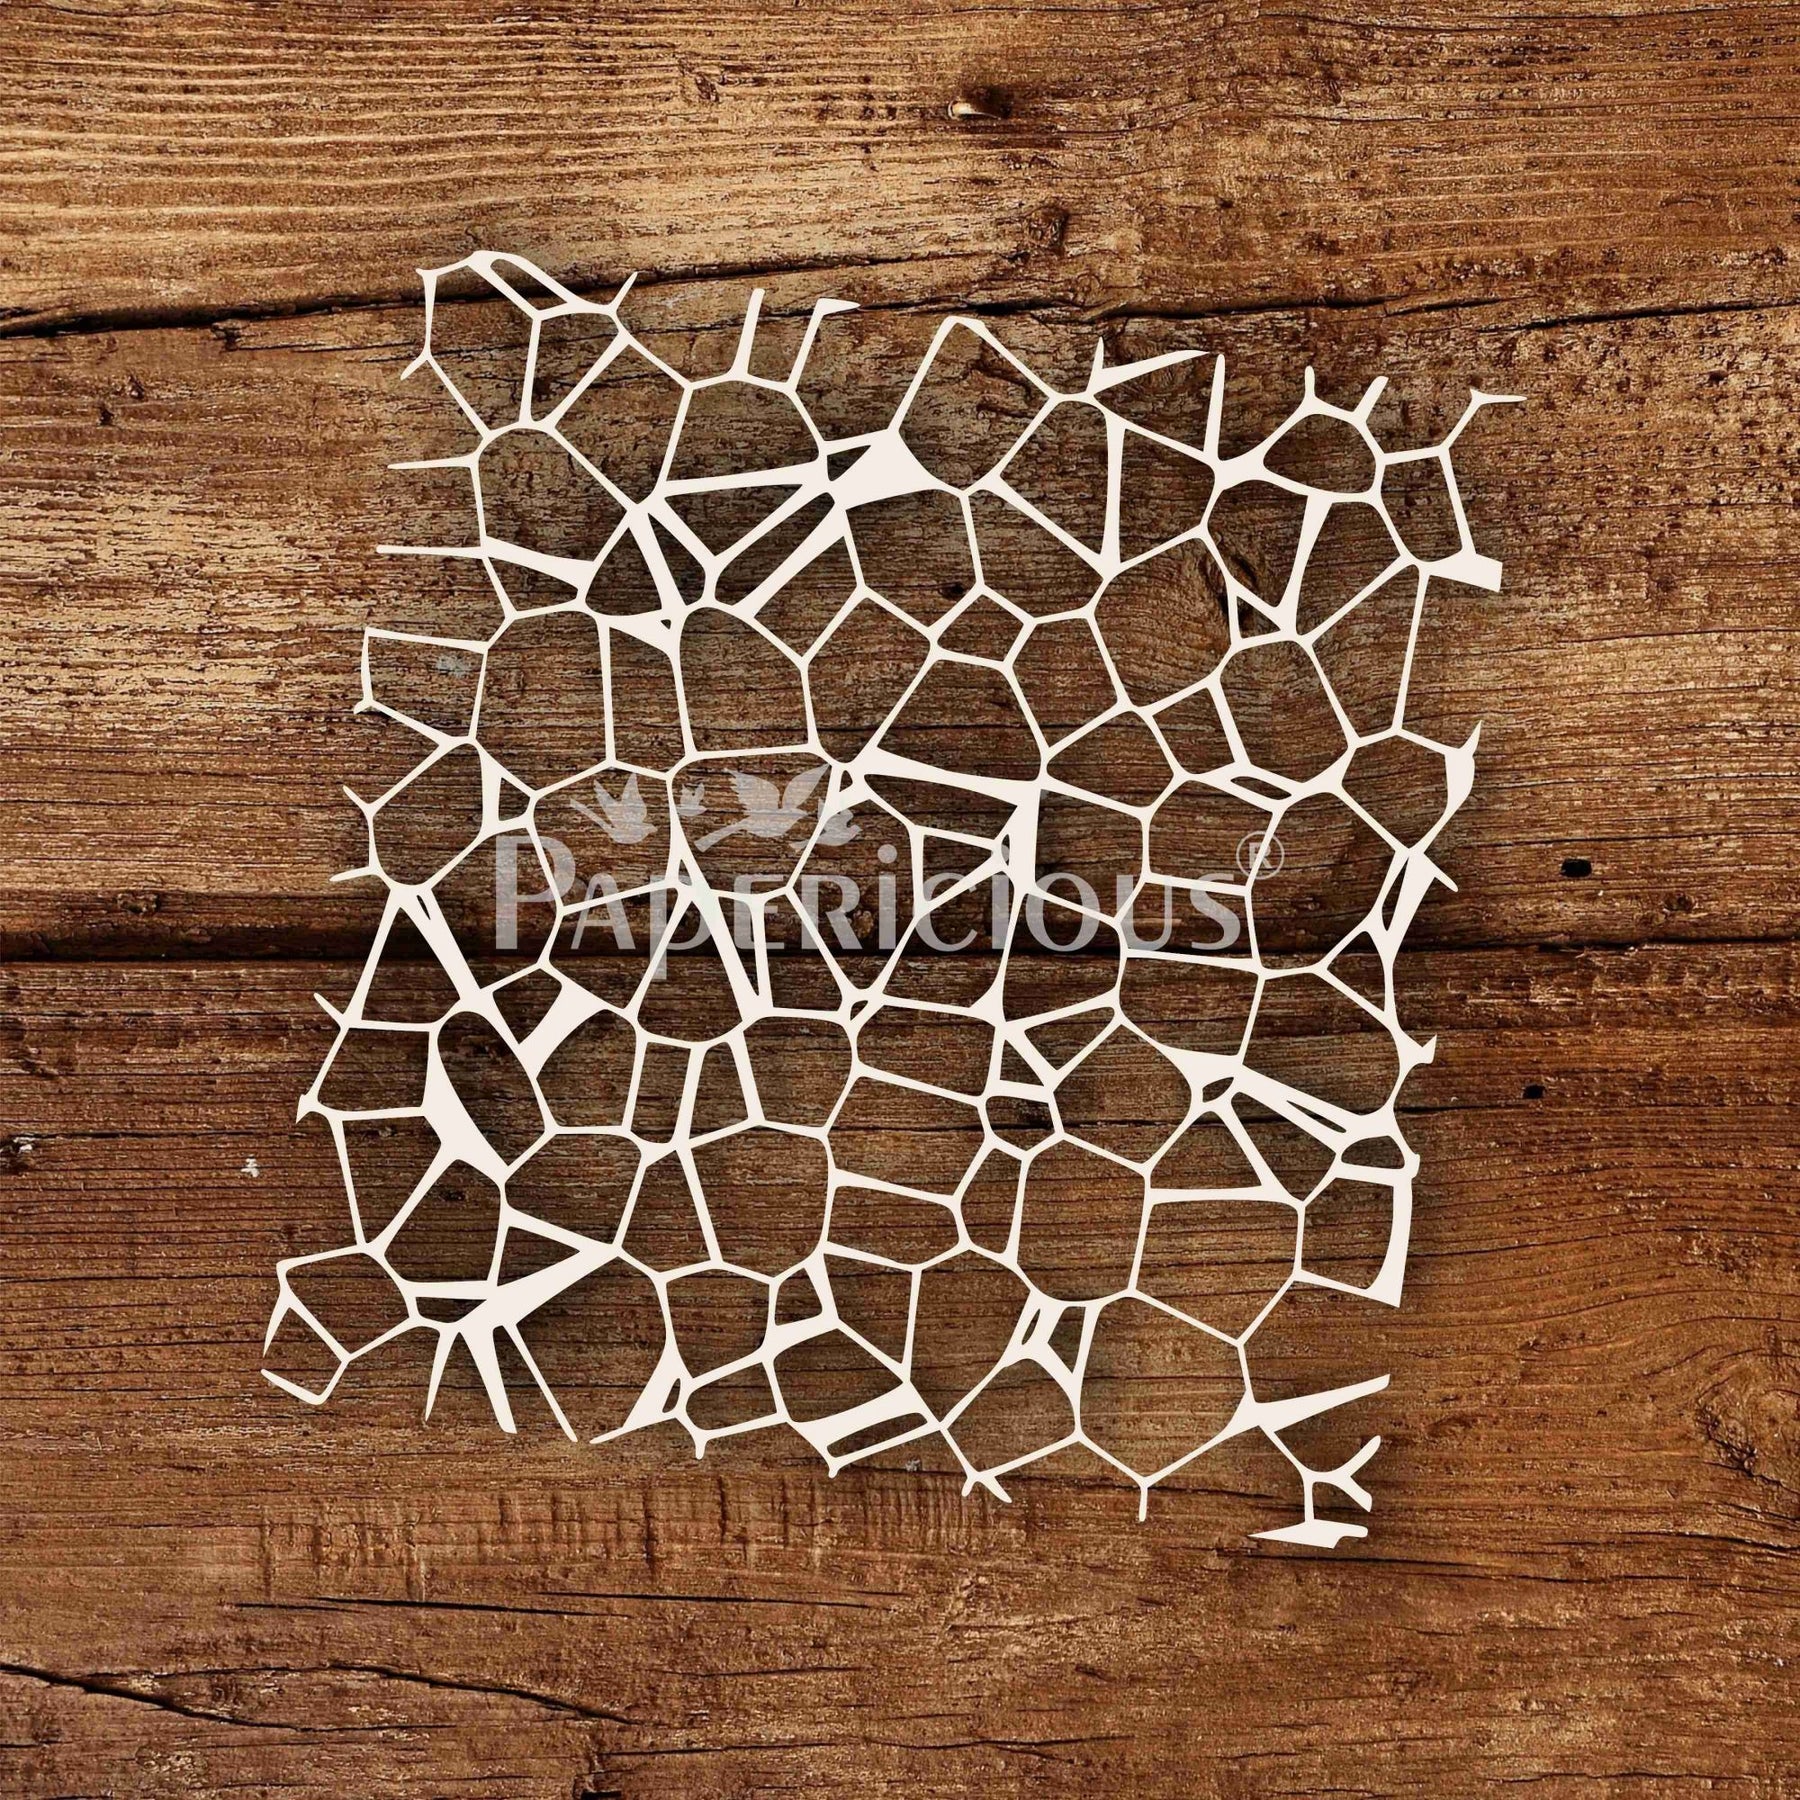 Cracked Wall - 6x6 Inch Laser Cut Pattern Chippis